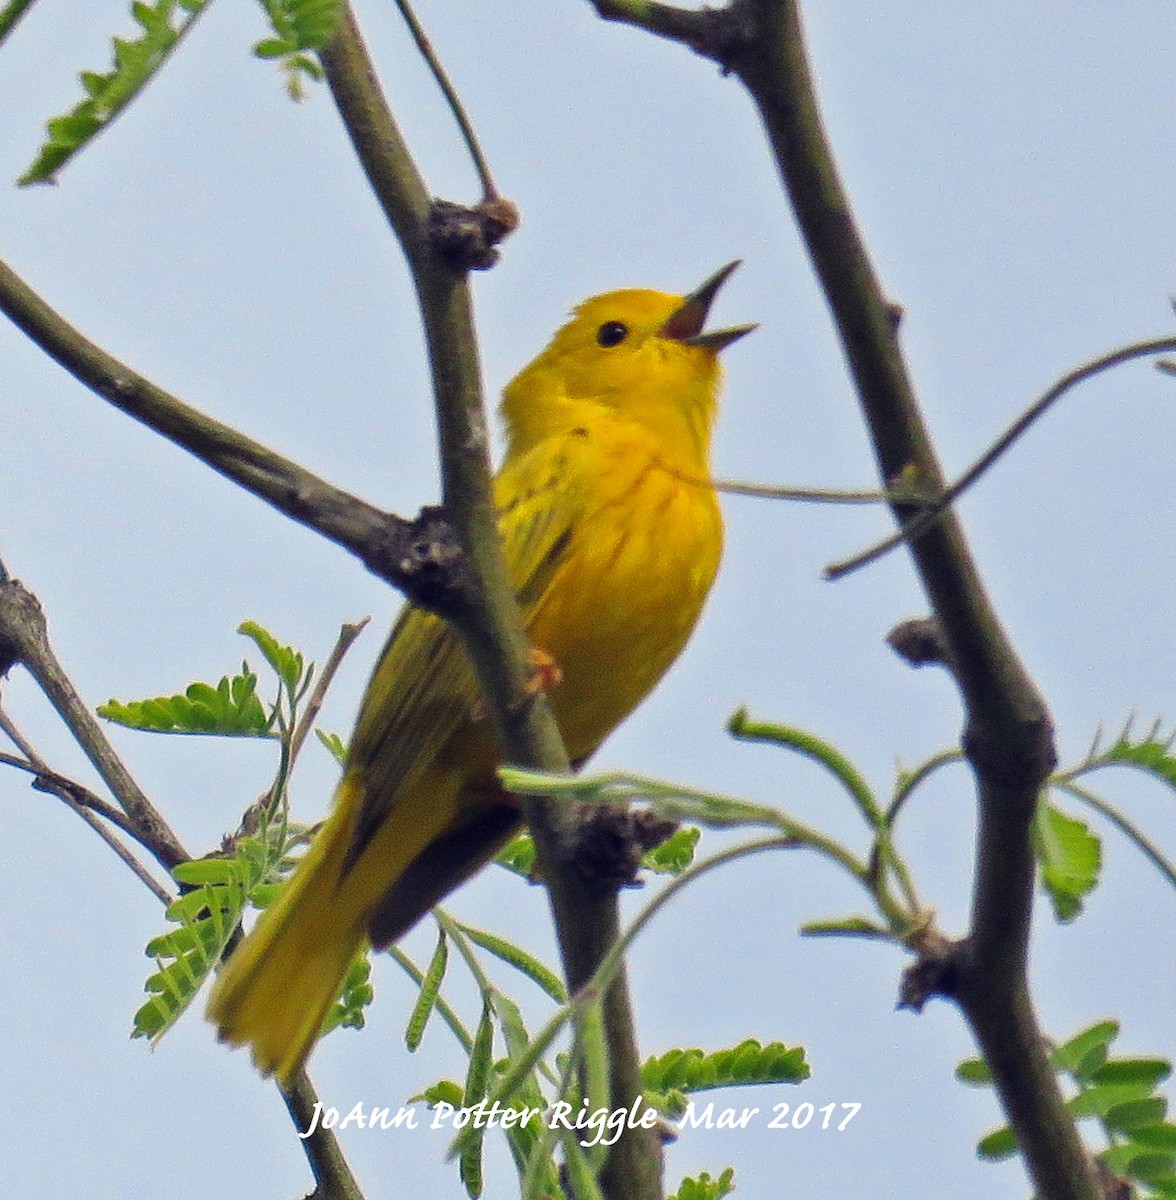 Yellow Warbler - JoAnn Potter Riggle 🦤